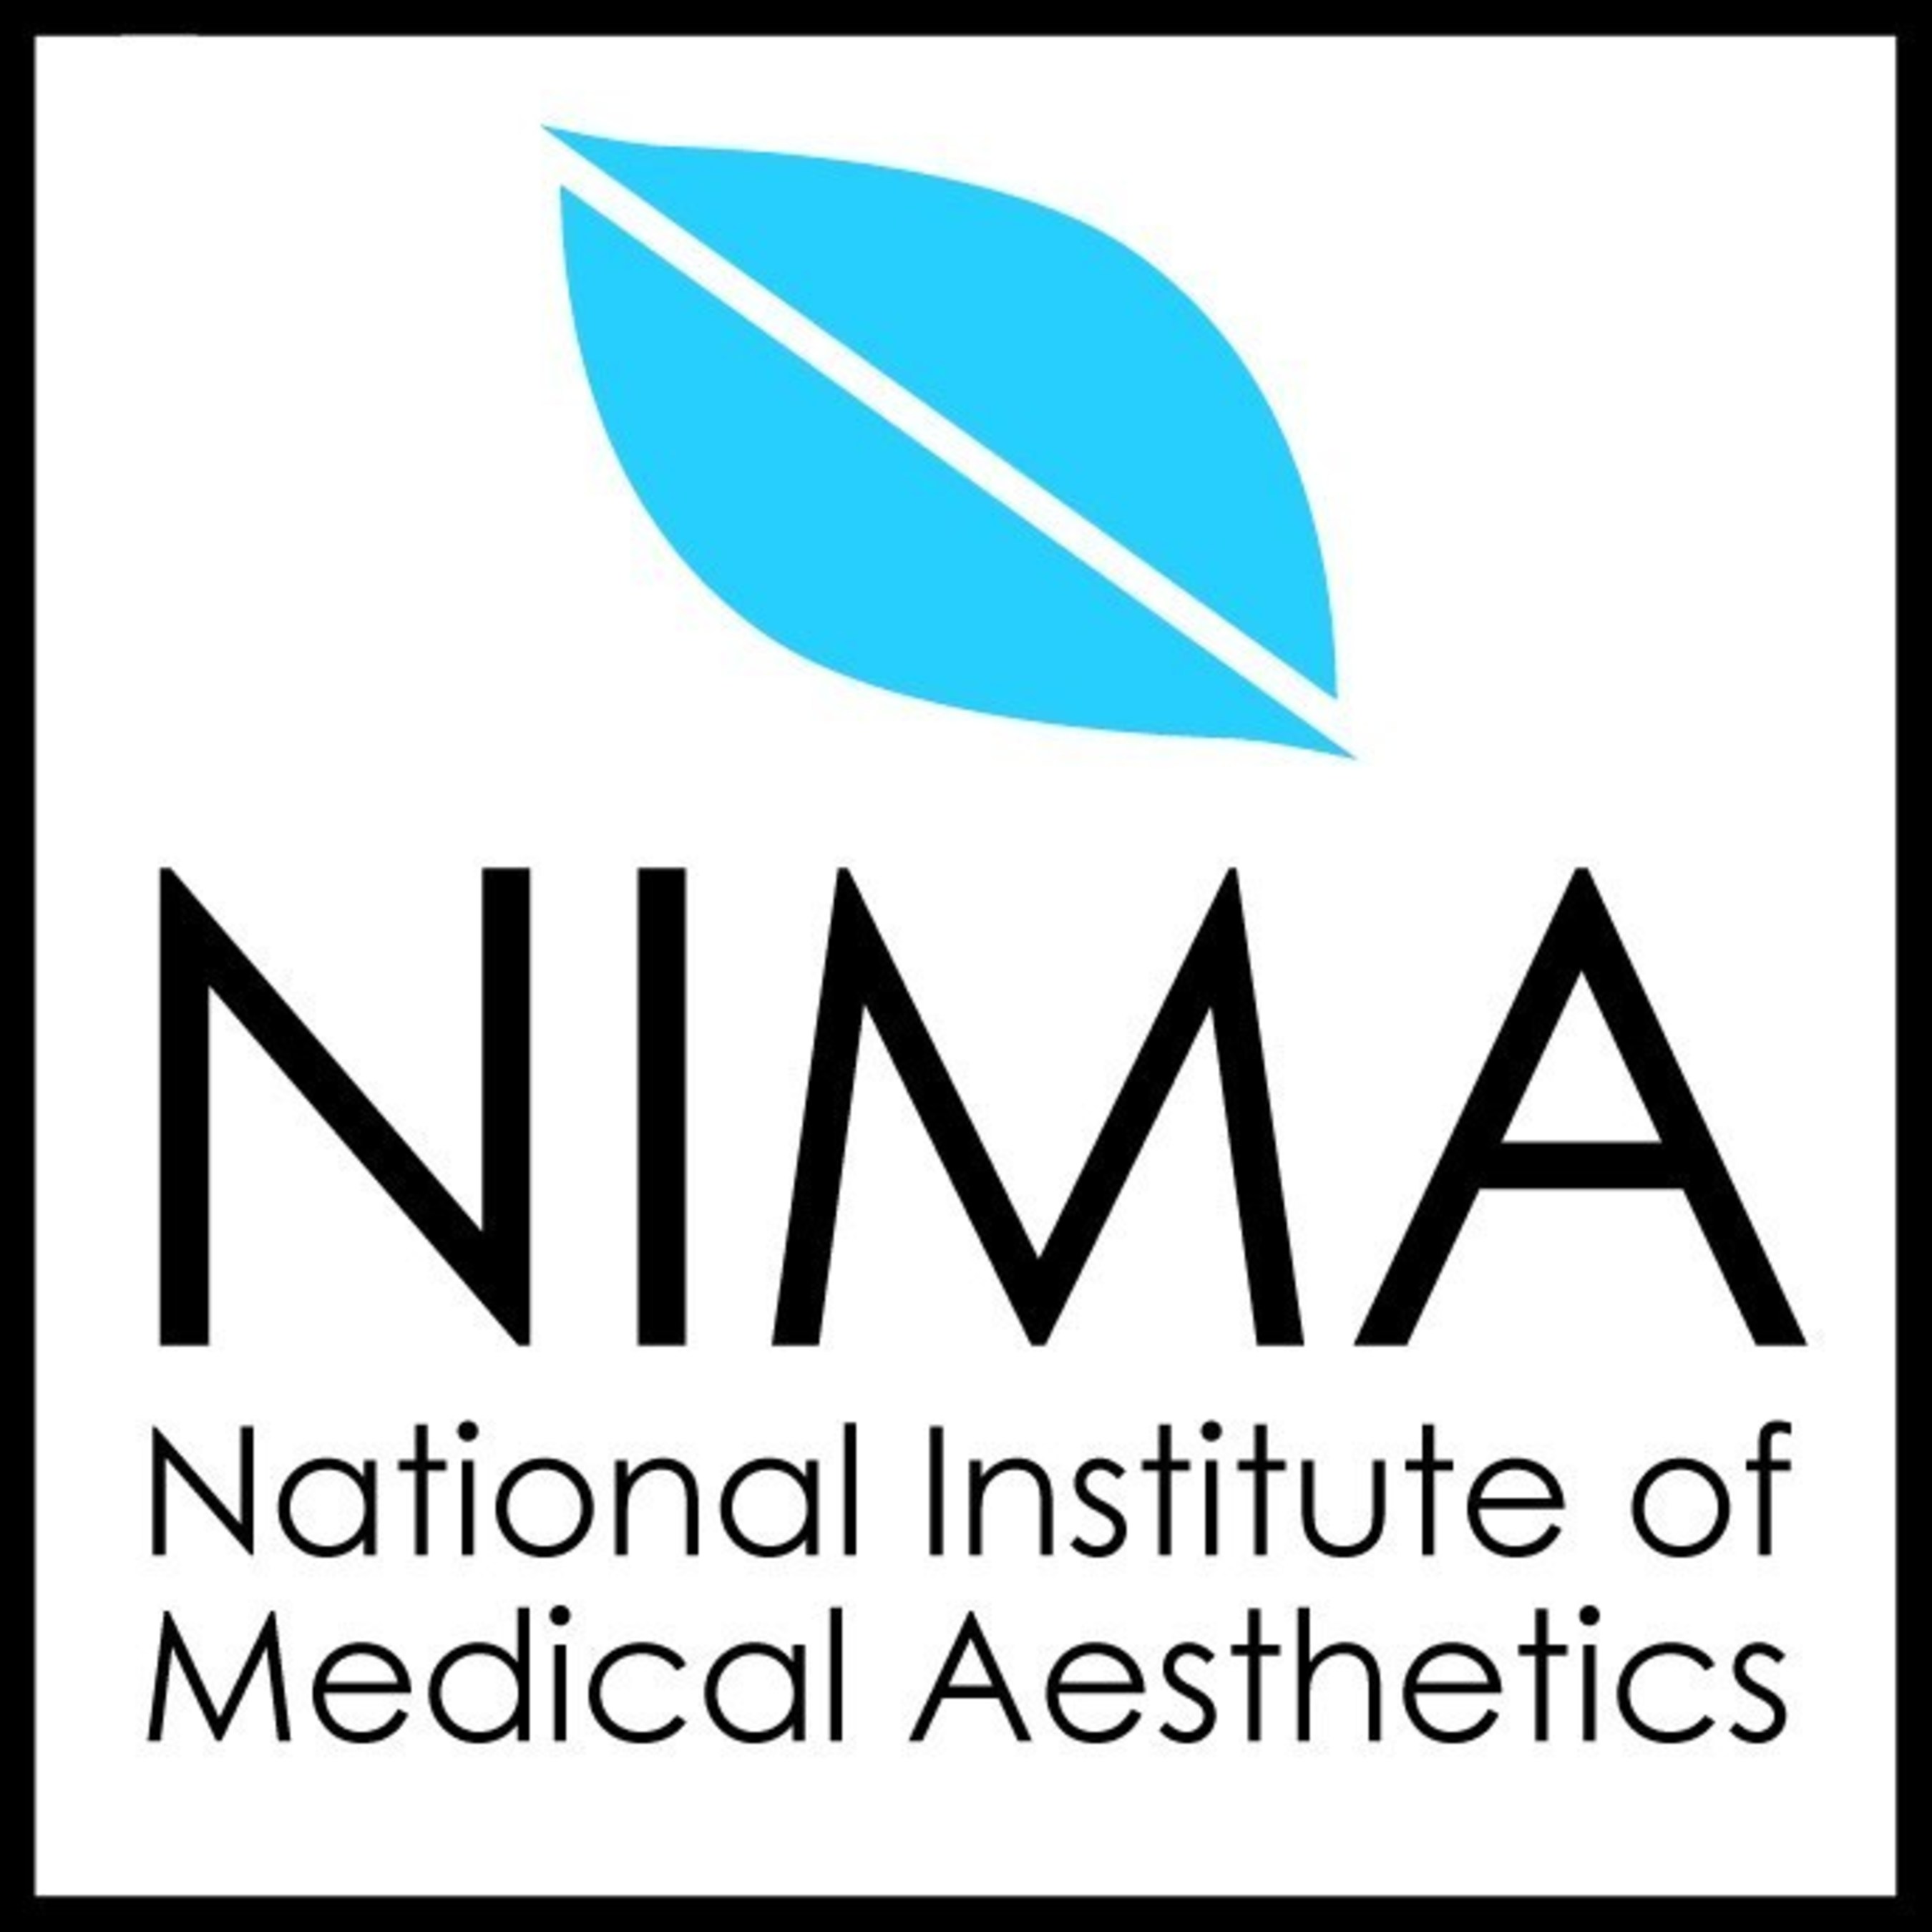 The National Institute of Medical Aesthetics (NIMA) (PRNewsFoto/National Institute of Medical...) (PRNewsFoto/National Institute of Medical...)